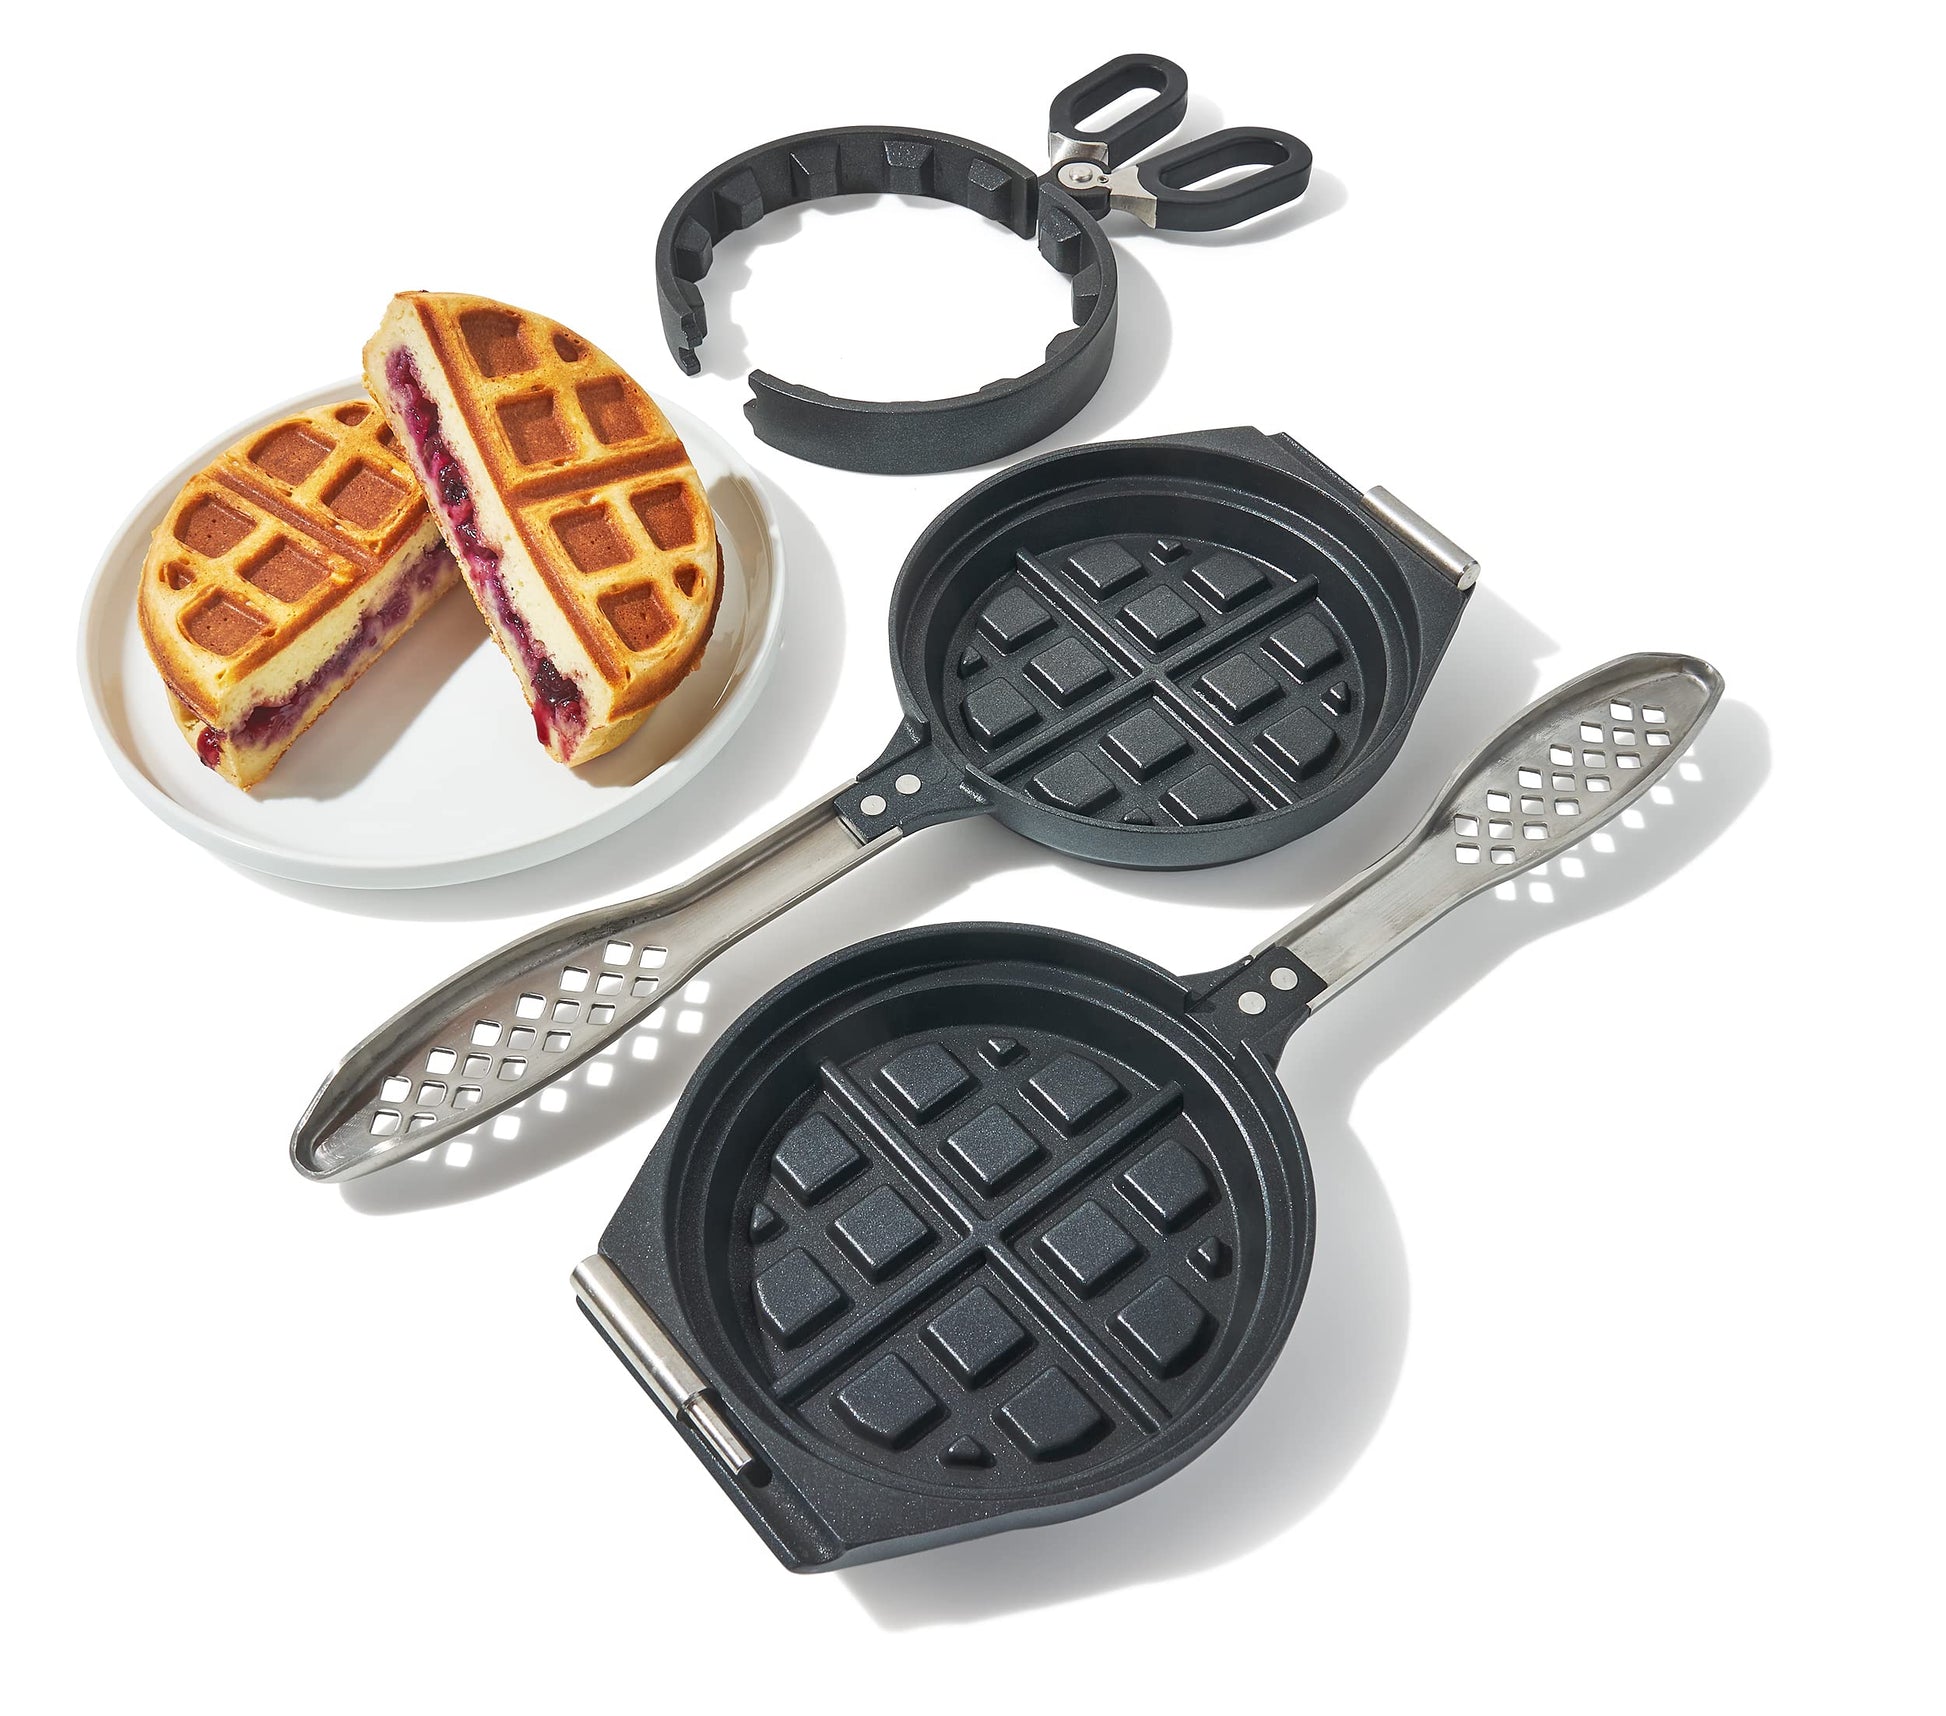 The Story Behind Wonderffle-a New Black Owned Stuffed Waffle Maker